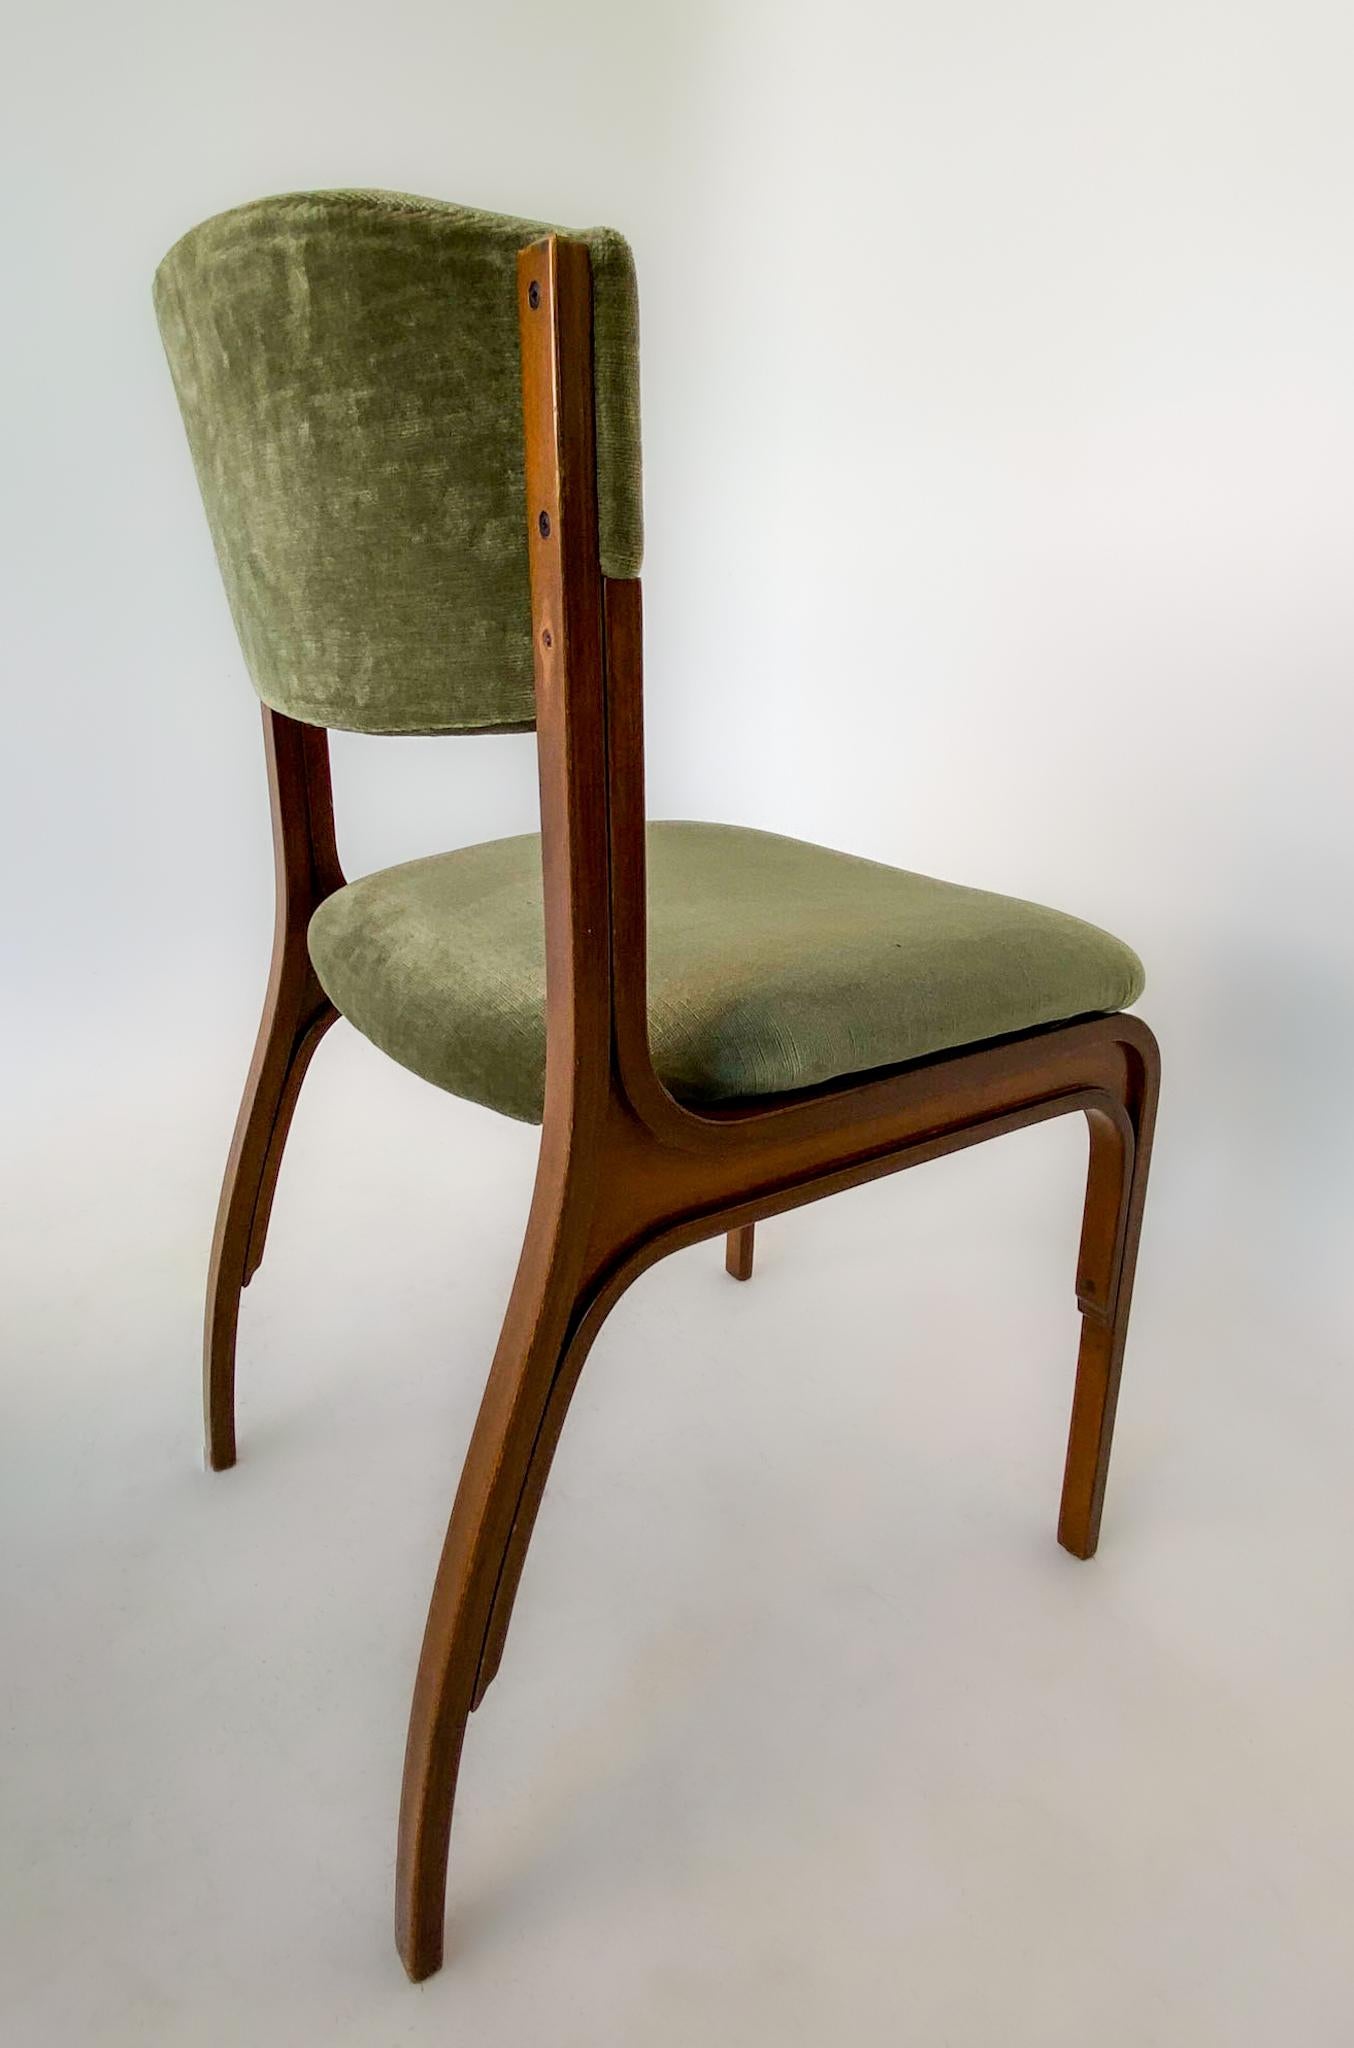 Mid-Century Modern green velvet dining chairs by Gianfranco Frattini for Cantieri Carngati, Italy 60s.

Elegant set of 4 dining chairs in original green velvet upholstery by the famous Italian Designer Gianfranco Frattini for the Italian